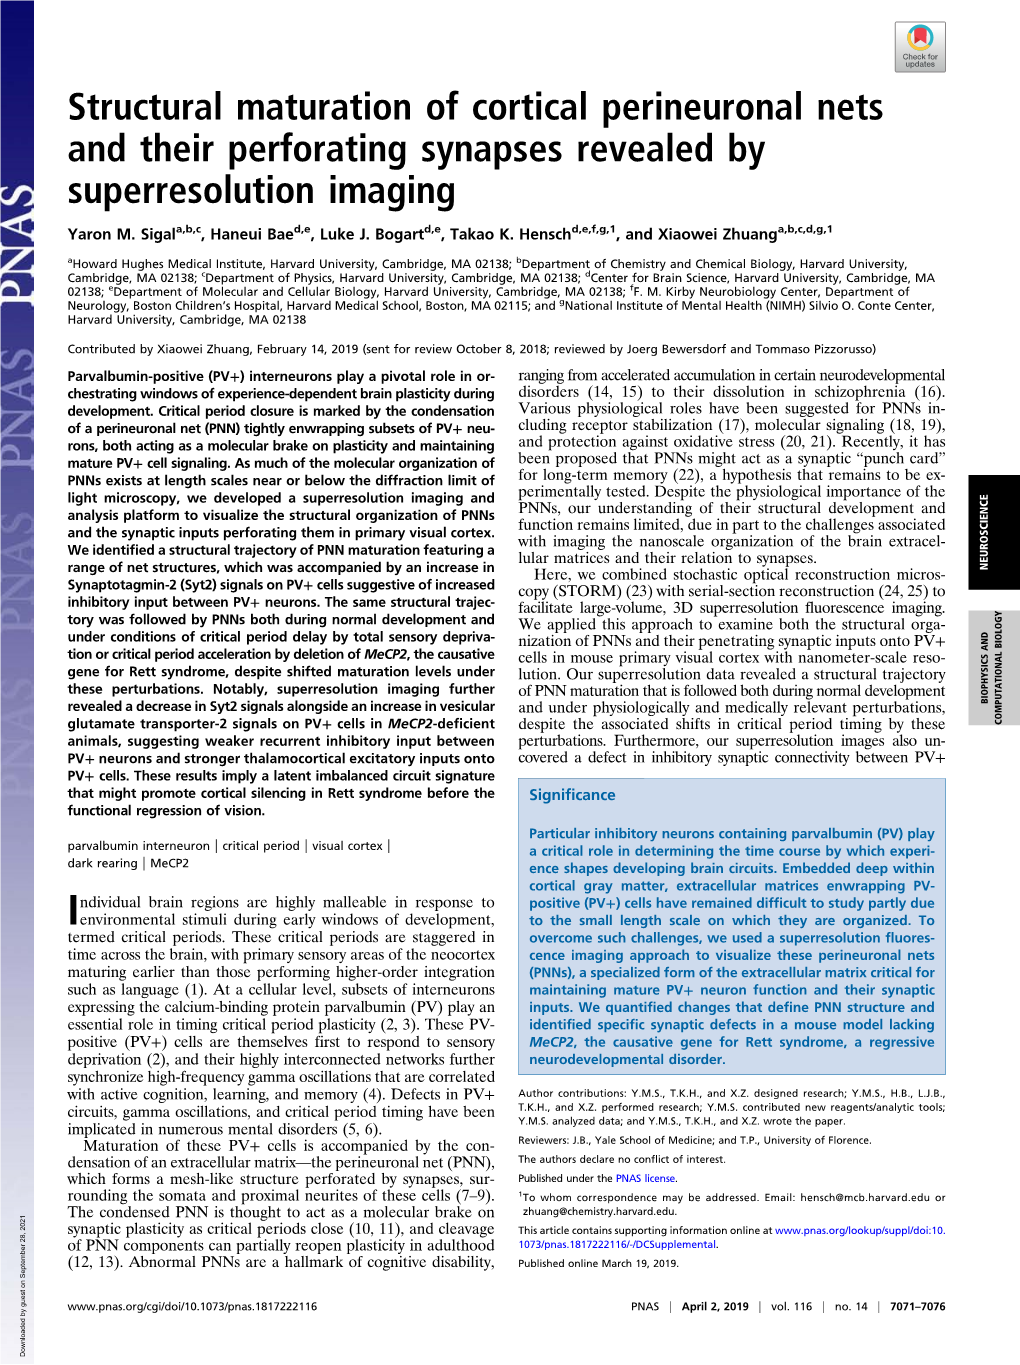 Structural Maturation of Cortical Perineuronal Nets and Their Perforating Synapses Revealed by Superresolution Imaging